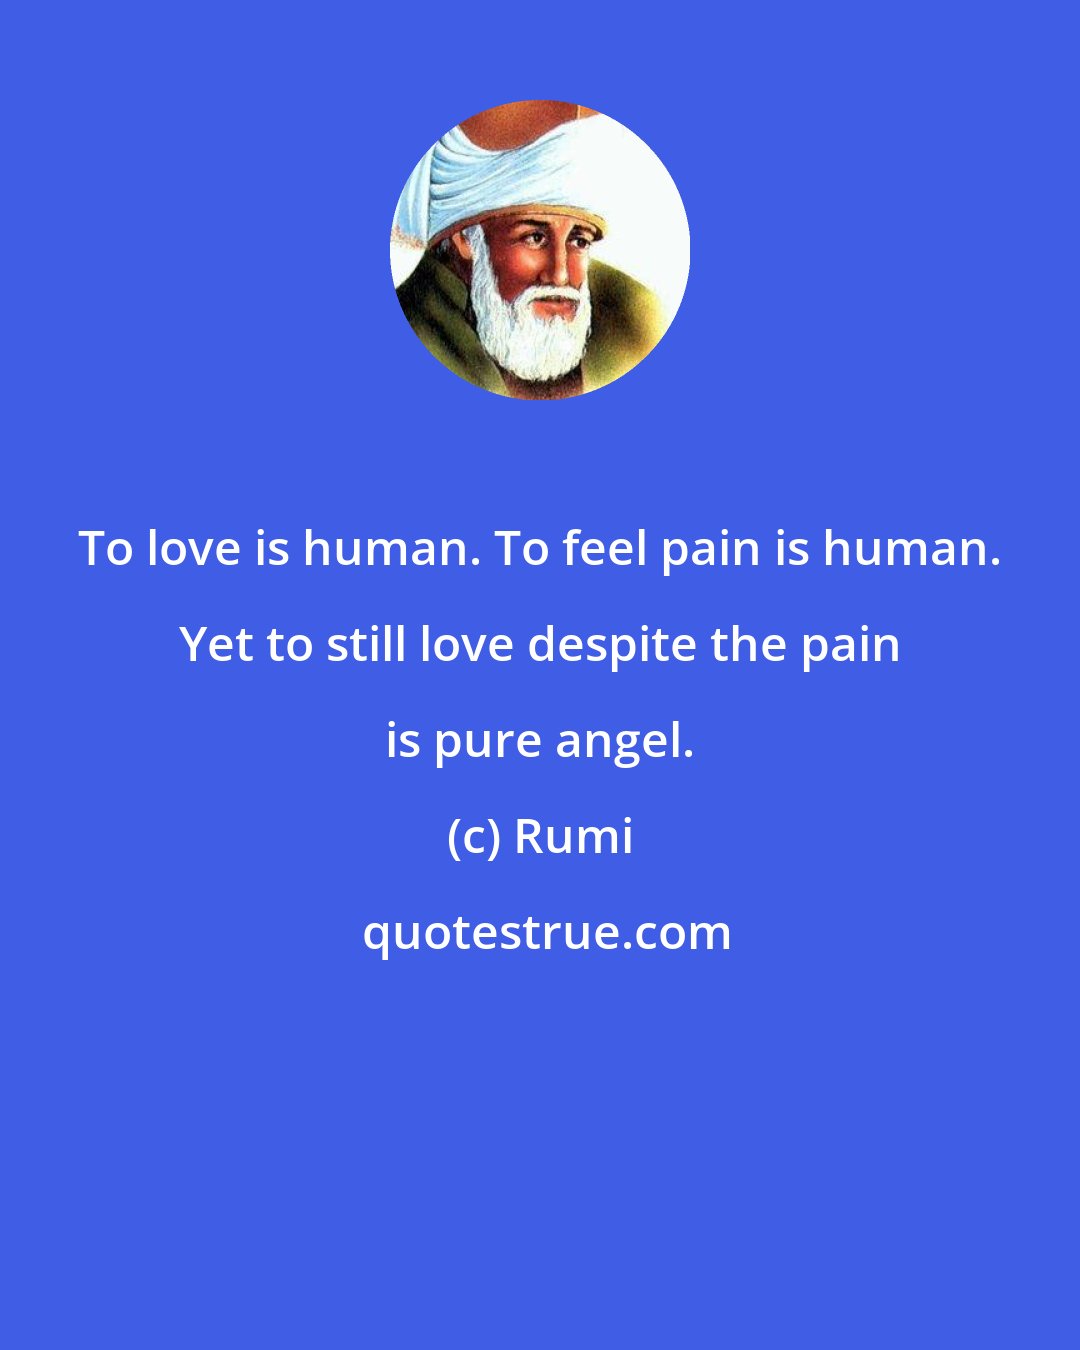 Rumi: To love is human. To feel pain is human. Yet to still love despite the pain is pure angel.